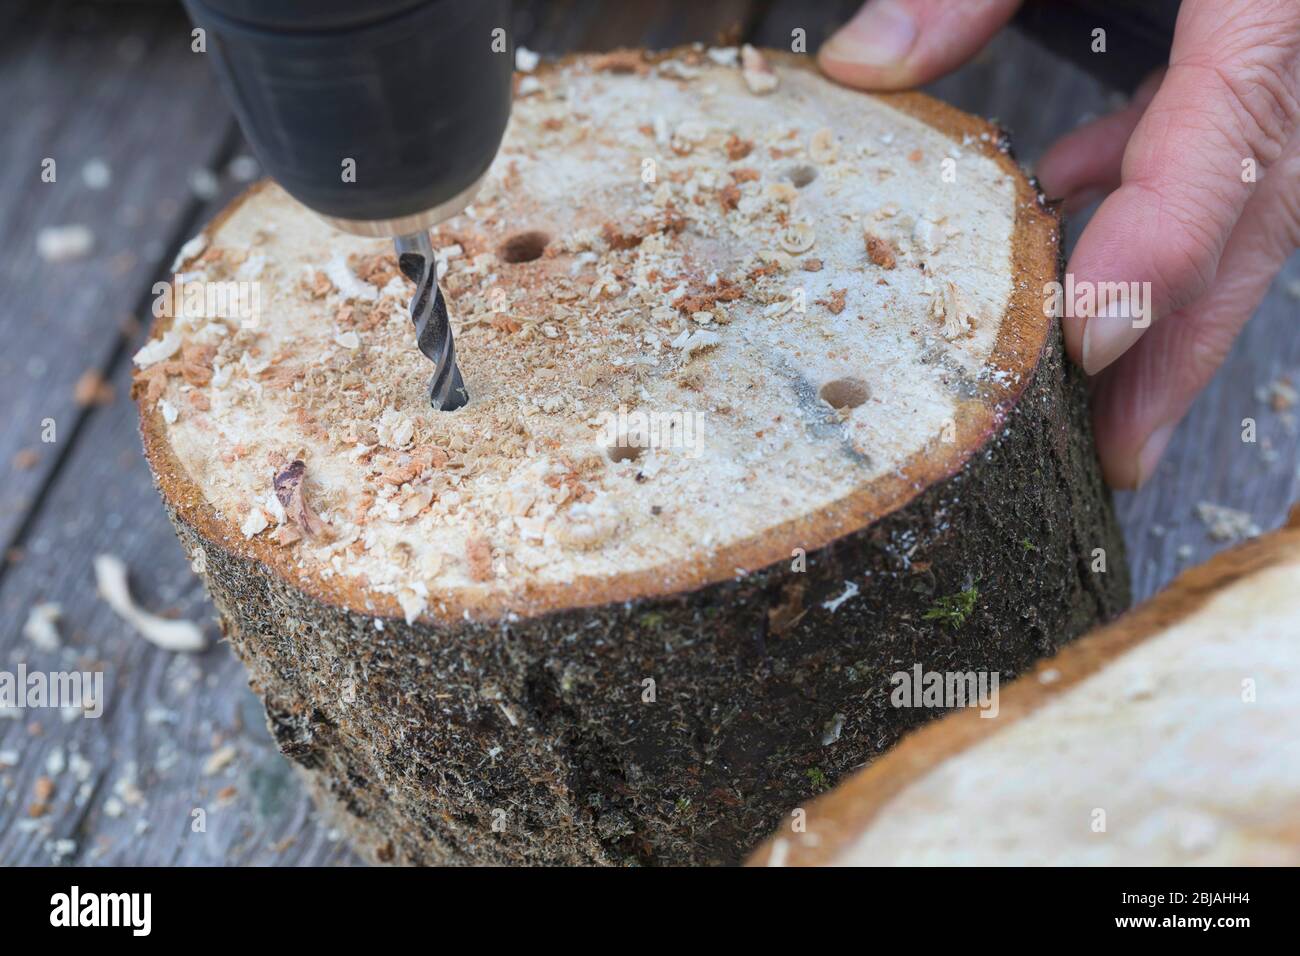 nesting aid for wild bees, drilling holes in wooden disc, Germany Stock Photo